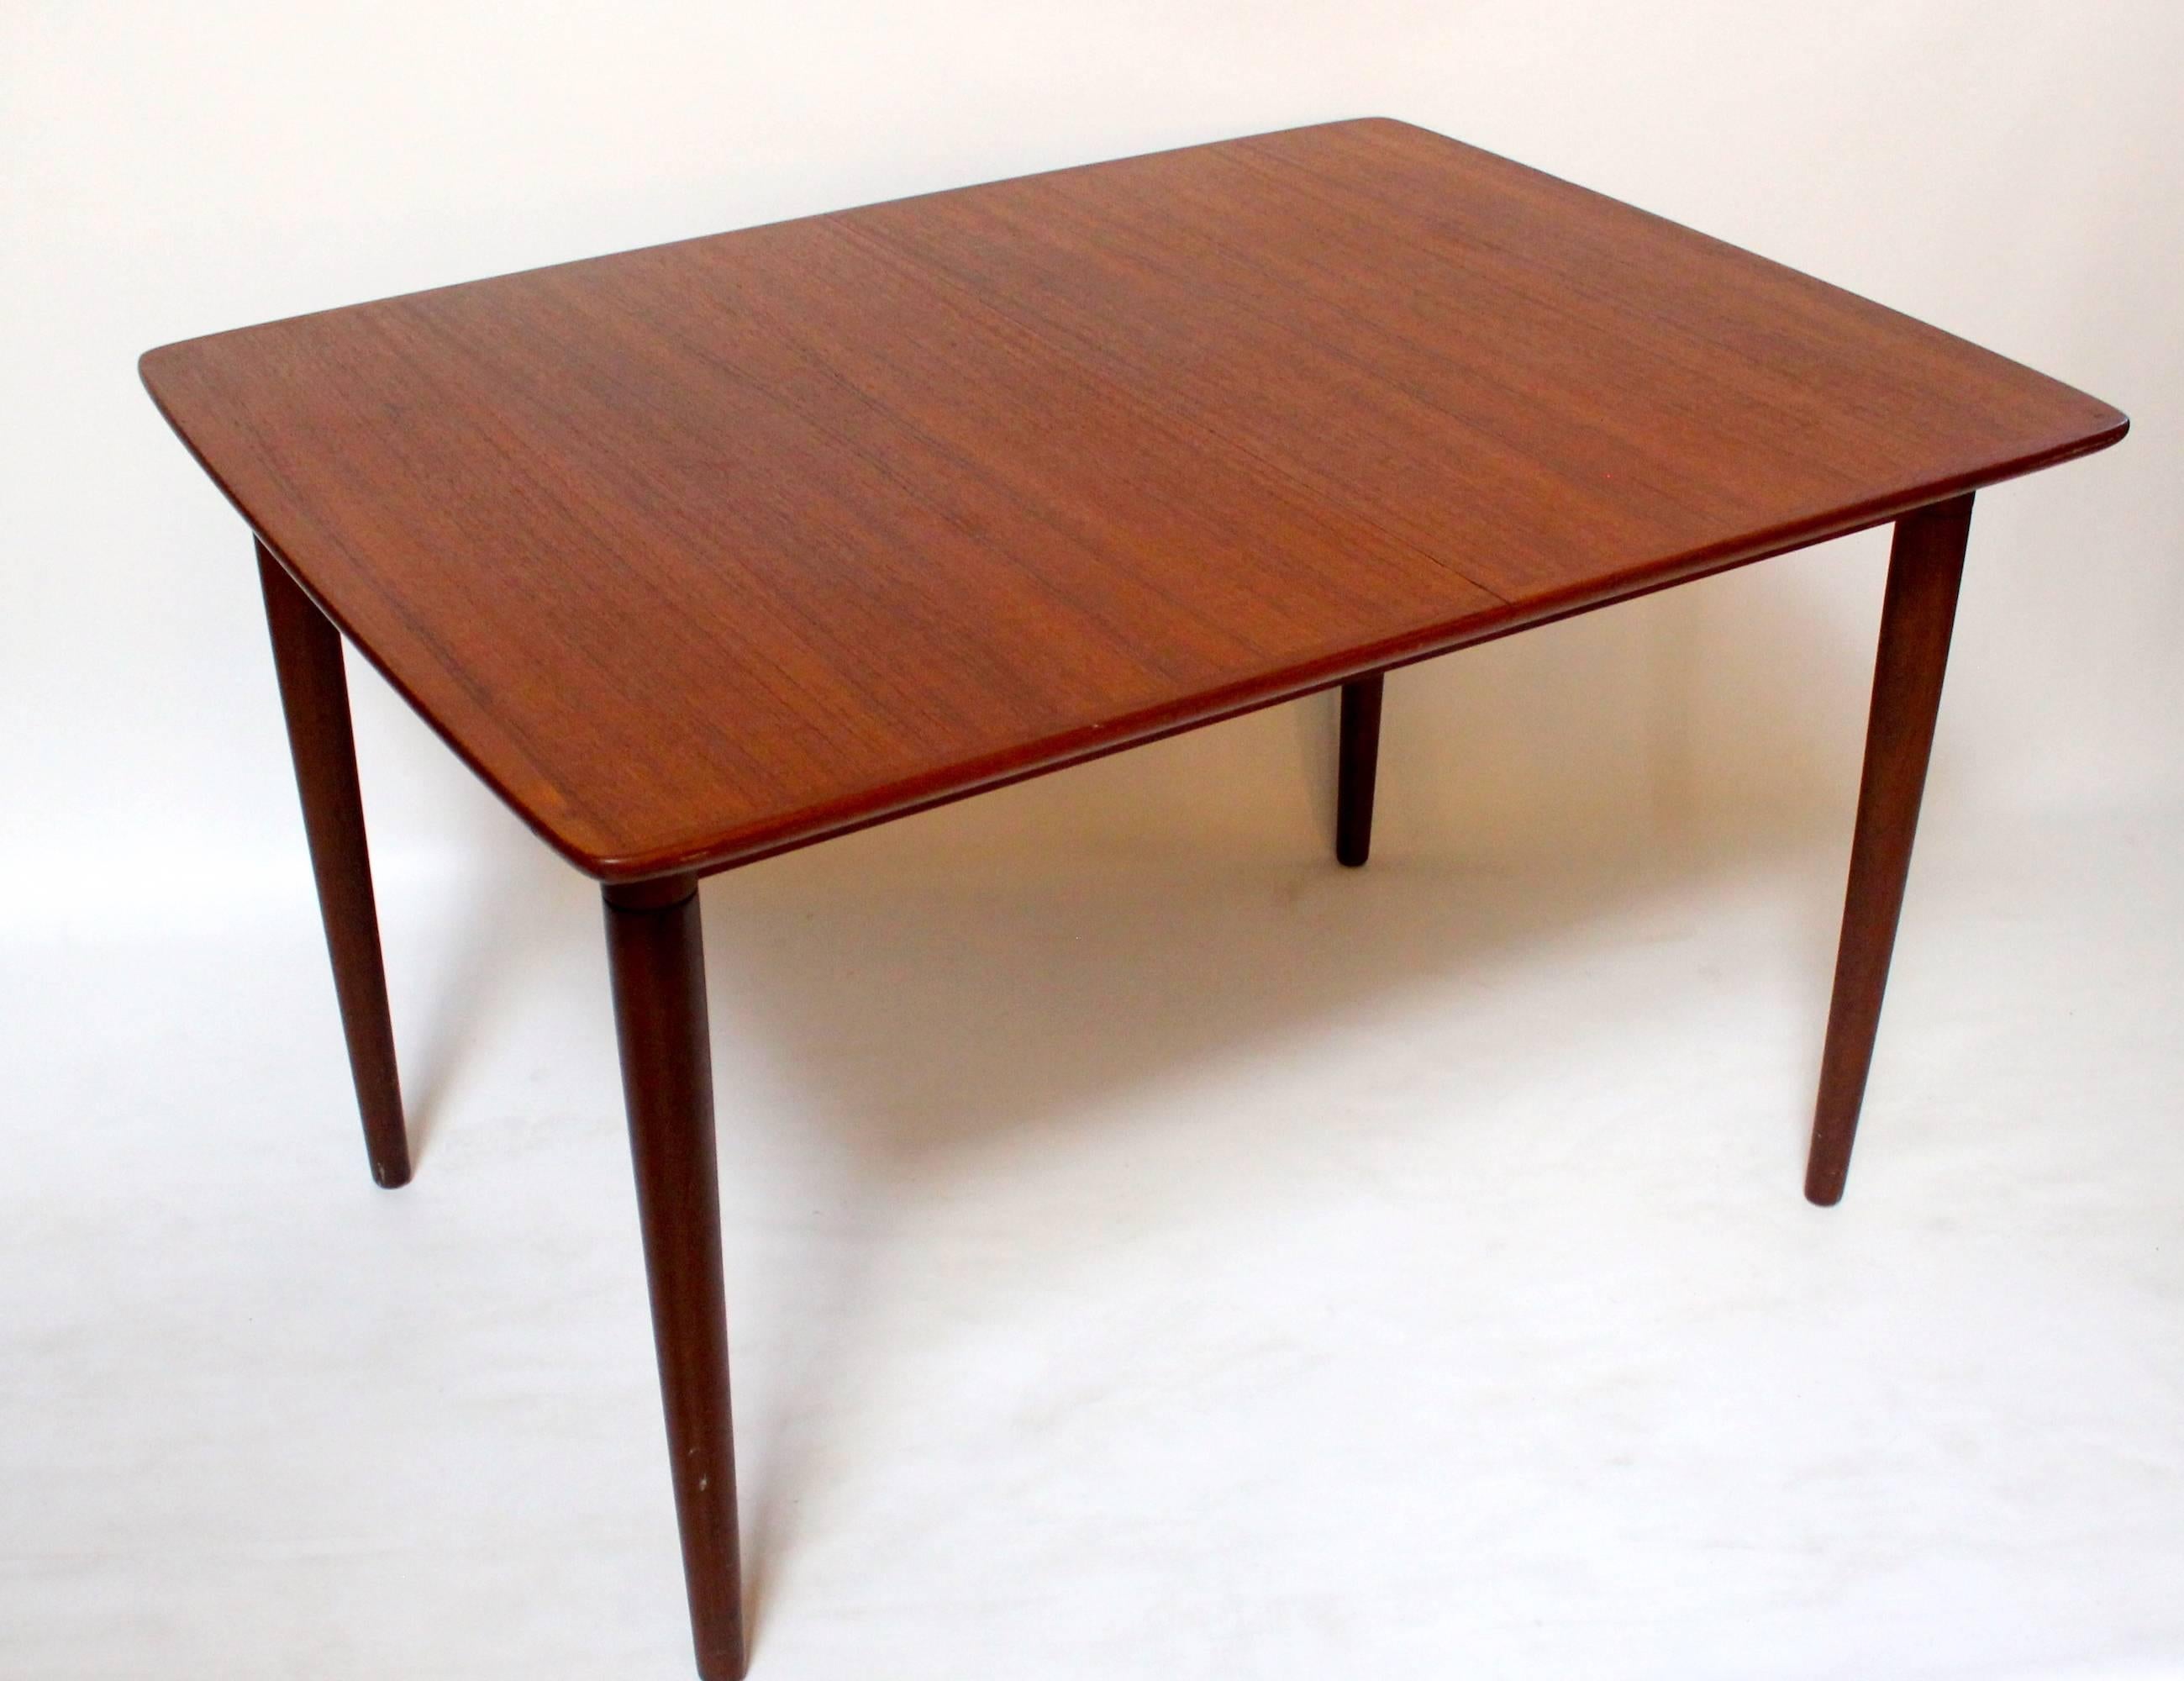 Mid-20th Century 1960s Danish Modern Teak Dining Table with Two Leaves